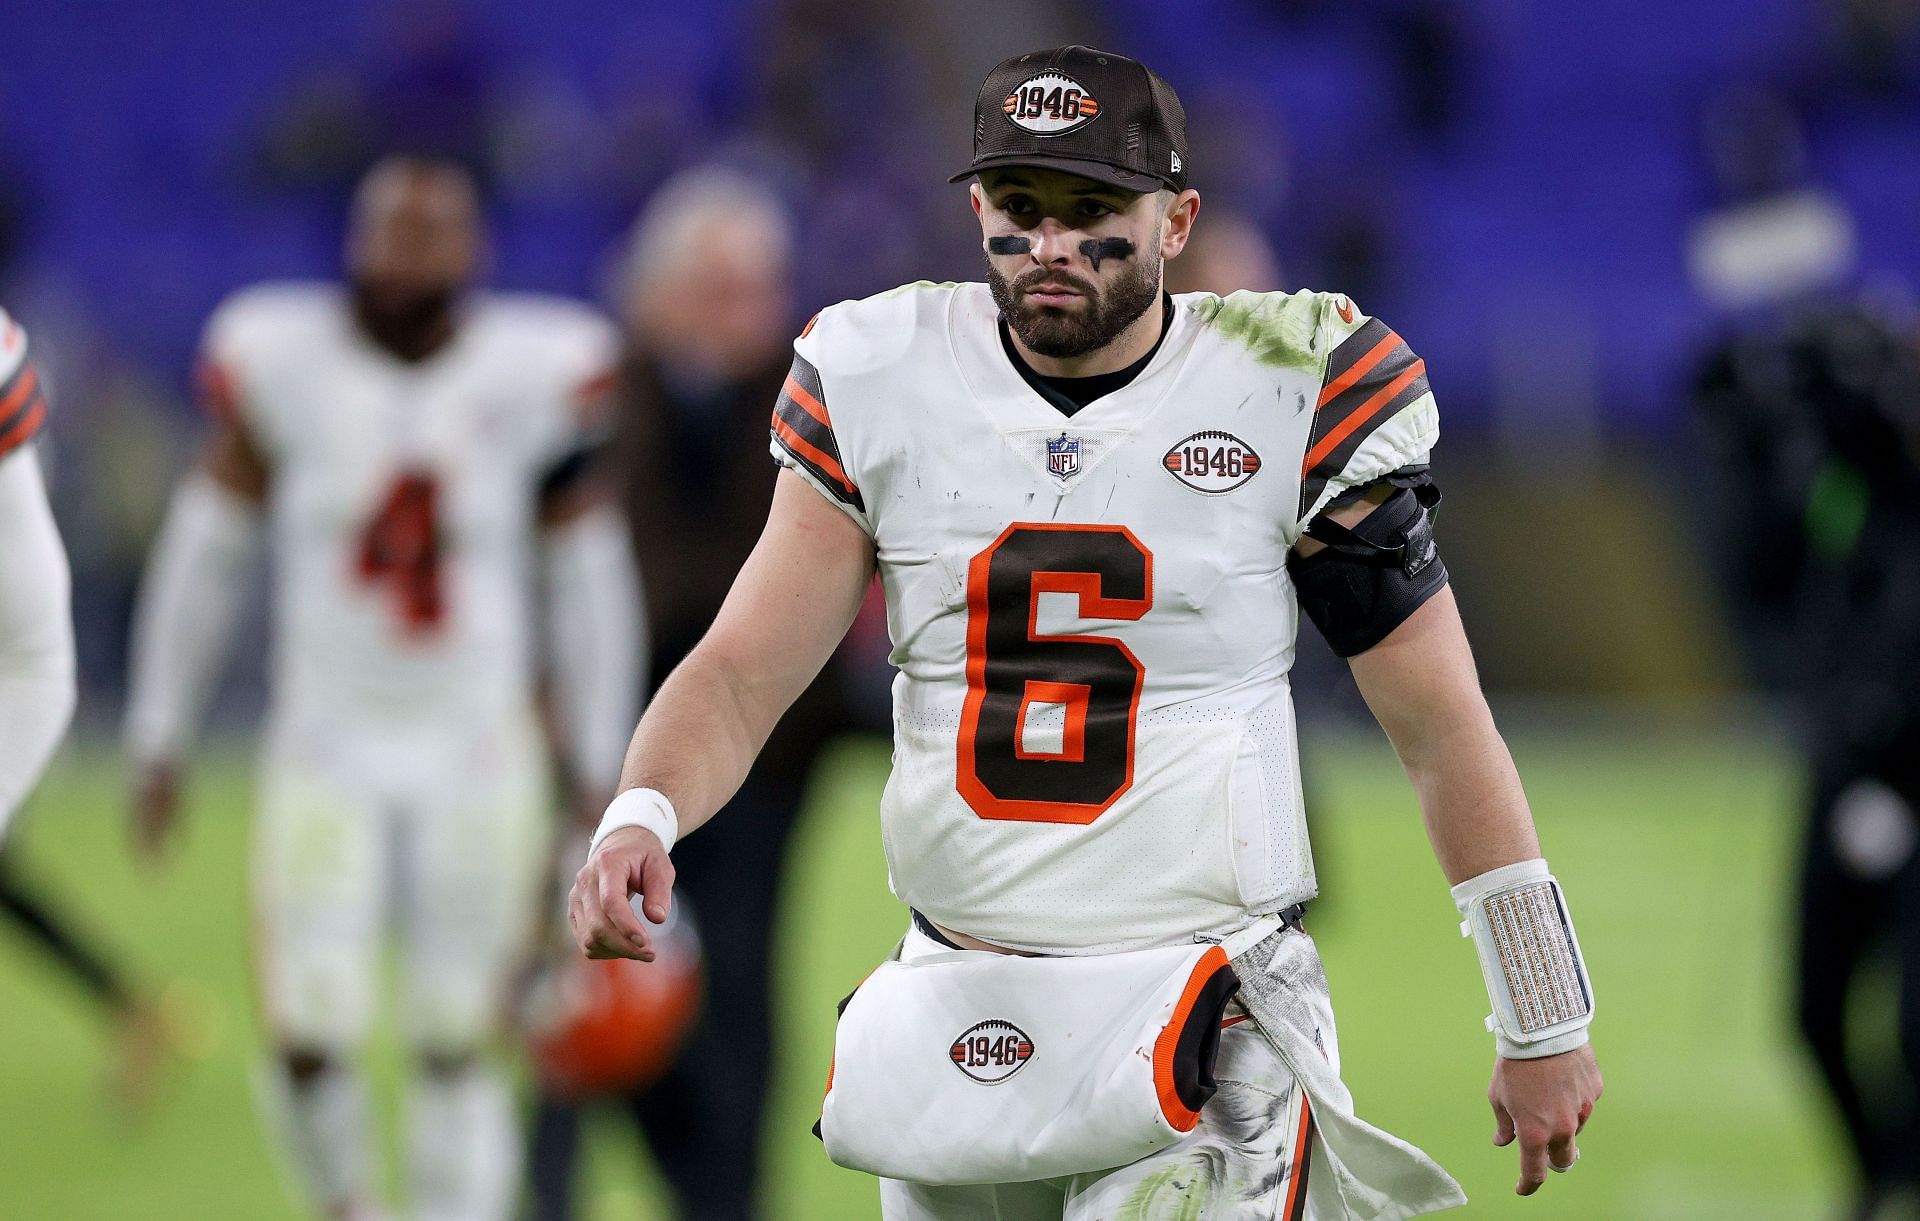 Baker Mayfield is in the limbo at the moment in NFL